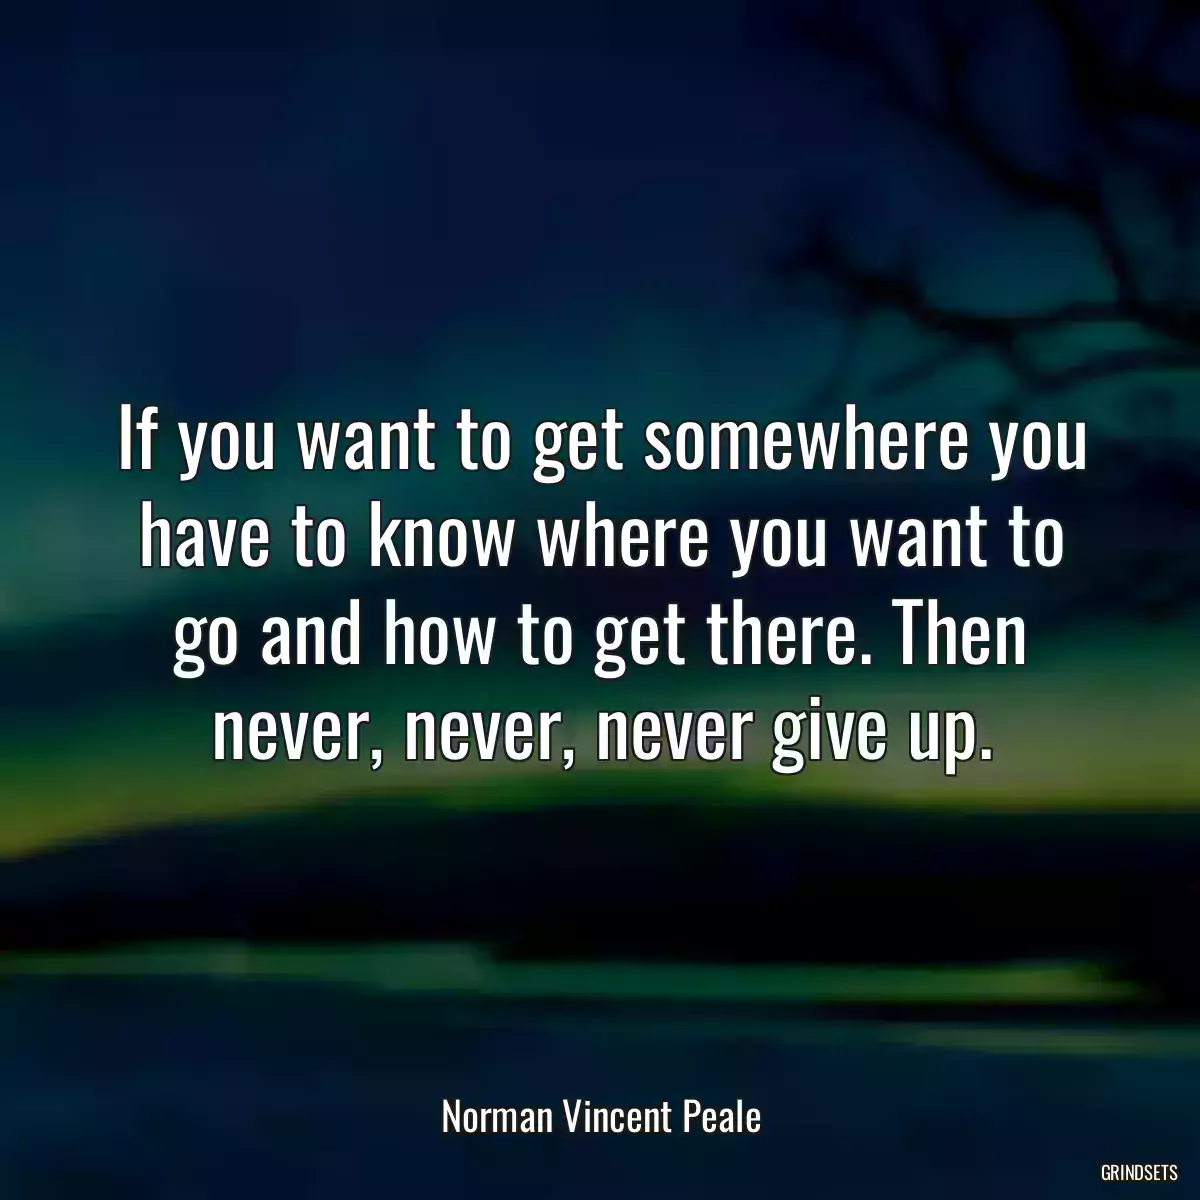 If you want to get somewhere you have to know where you want to go and how to get there. Then never, never, never give up.